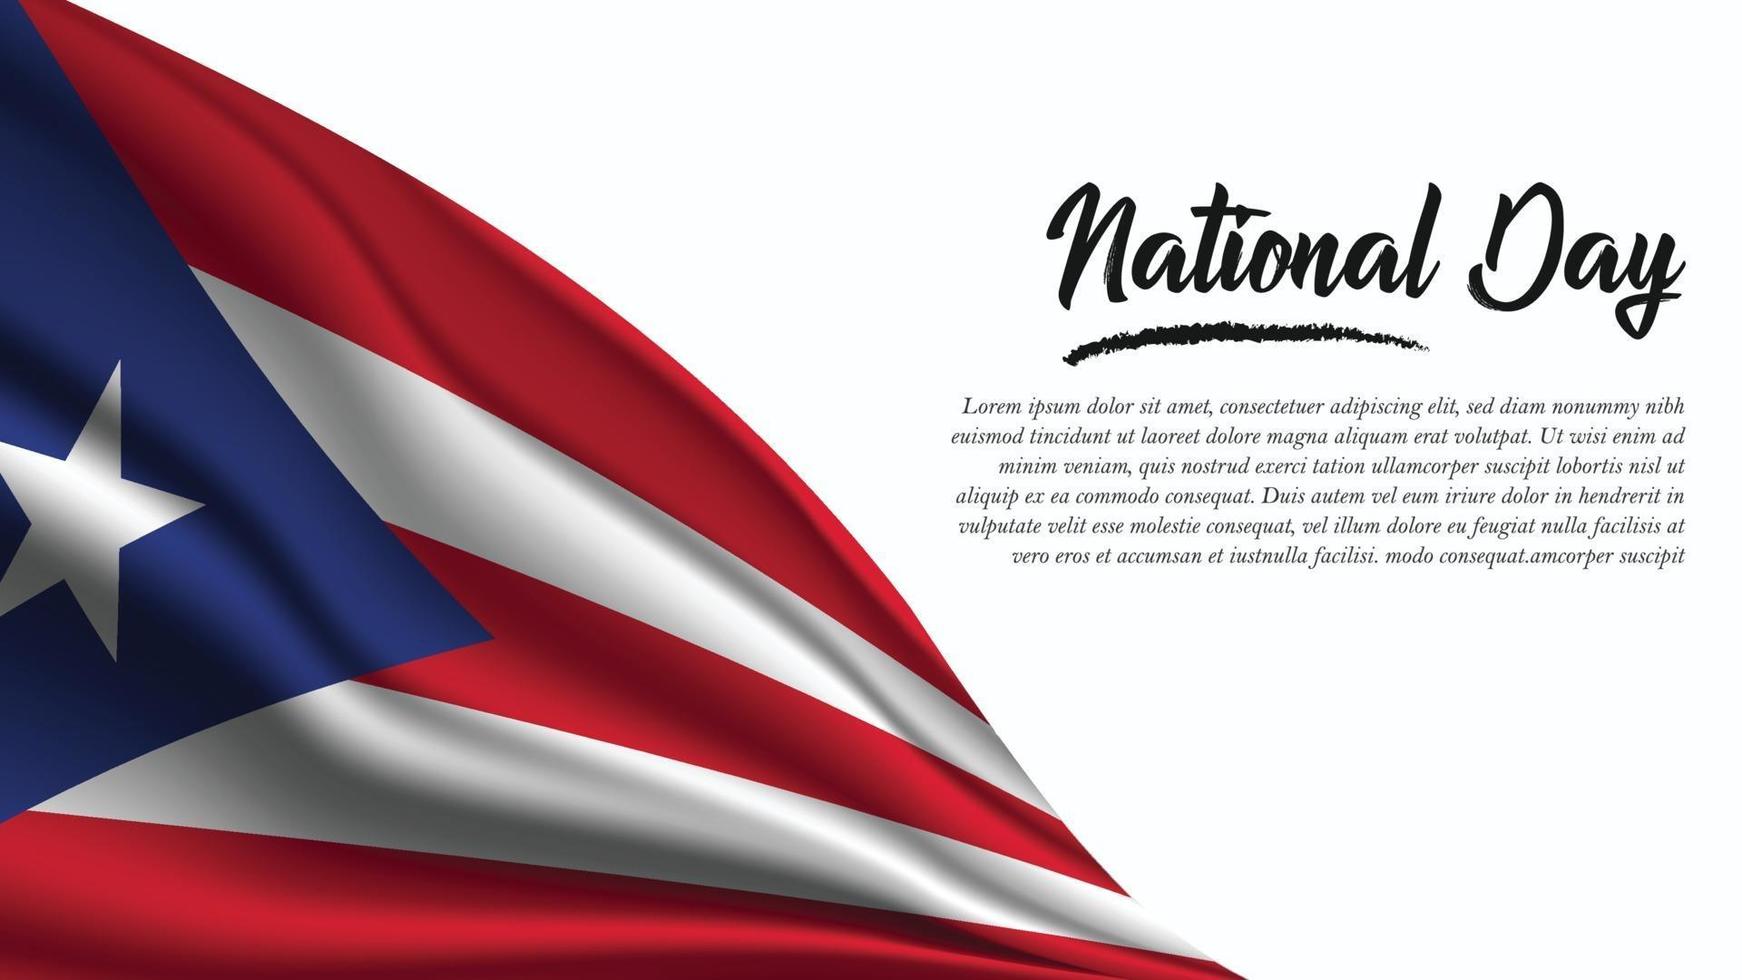 National Day Banner with Puerto Rico Flag background vector